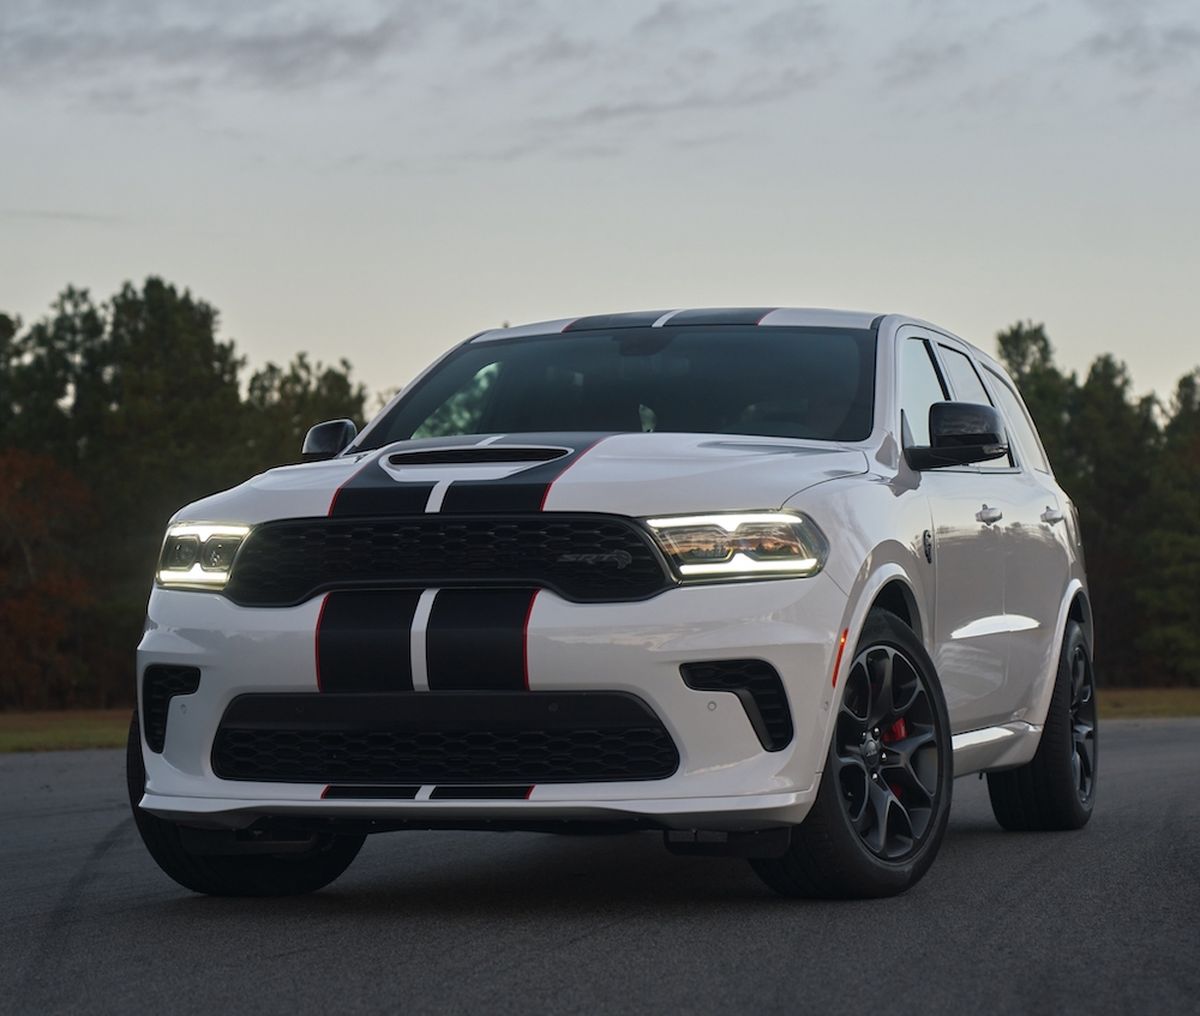 The Hellcat is what you get when you stuff a supercharged 6.2-liter Hellcat V-8 — the engine that famously powers Hellcat versions of the Charger and Challenger muscle cars — into the engine bay of a midsize CUV. (Dodge)